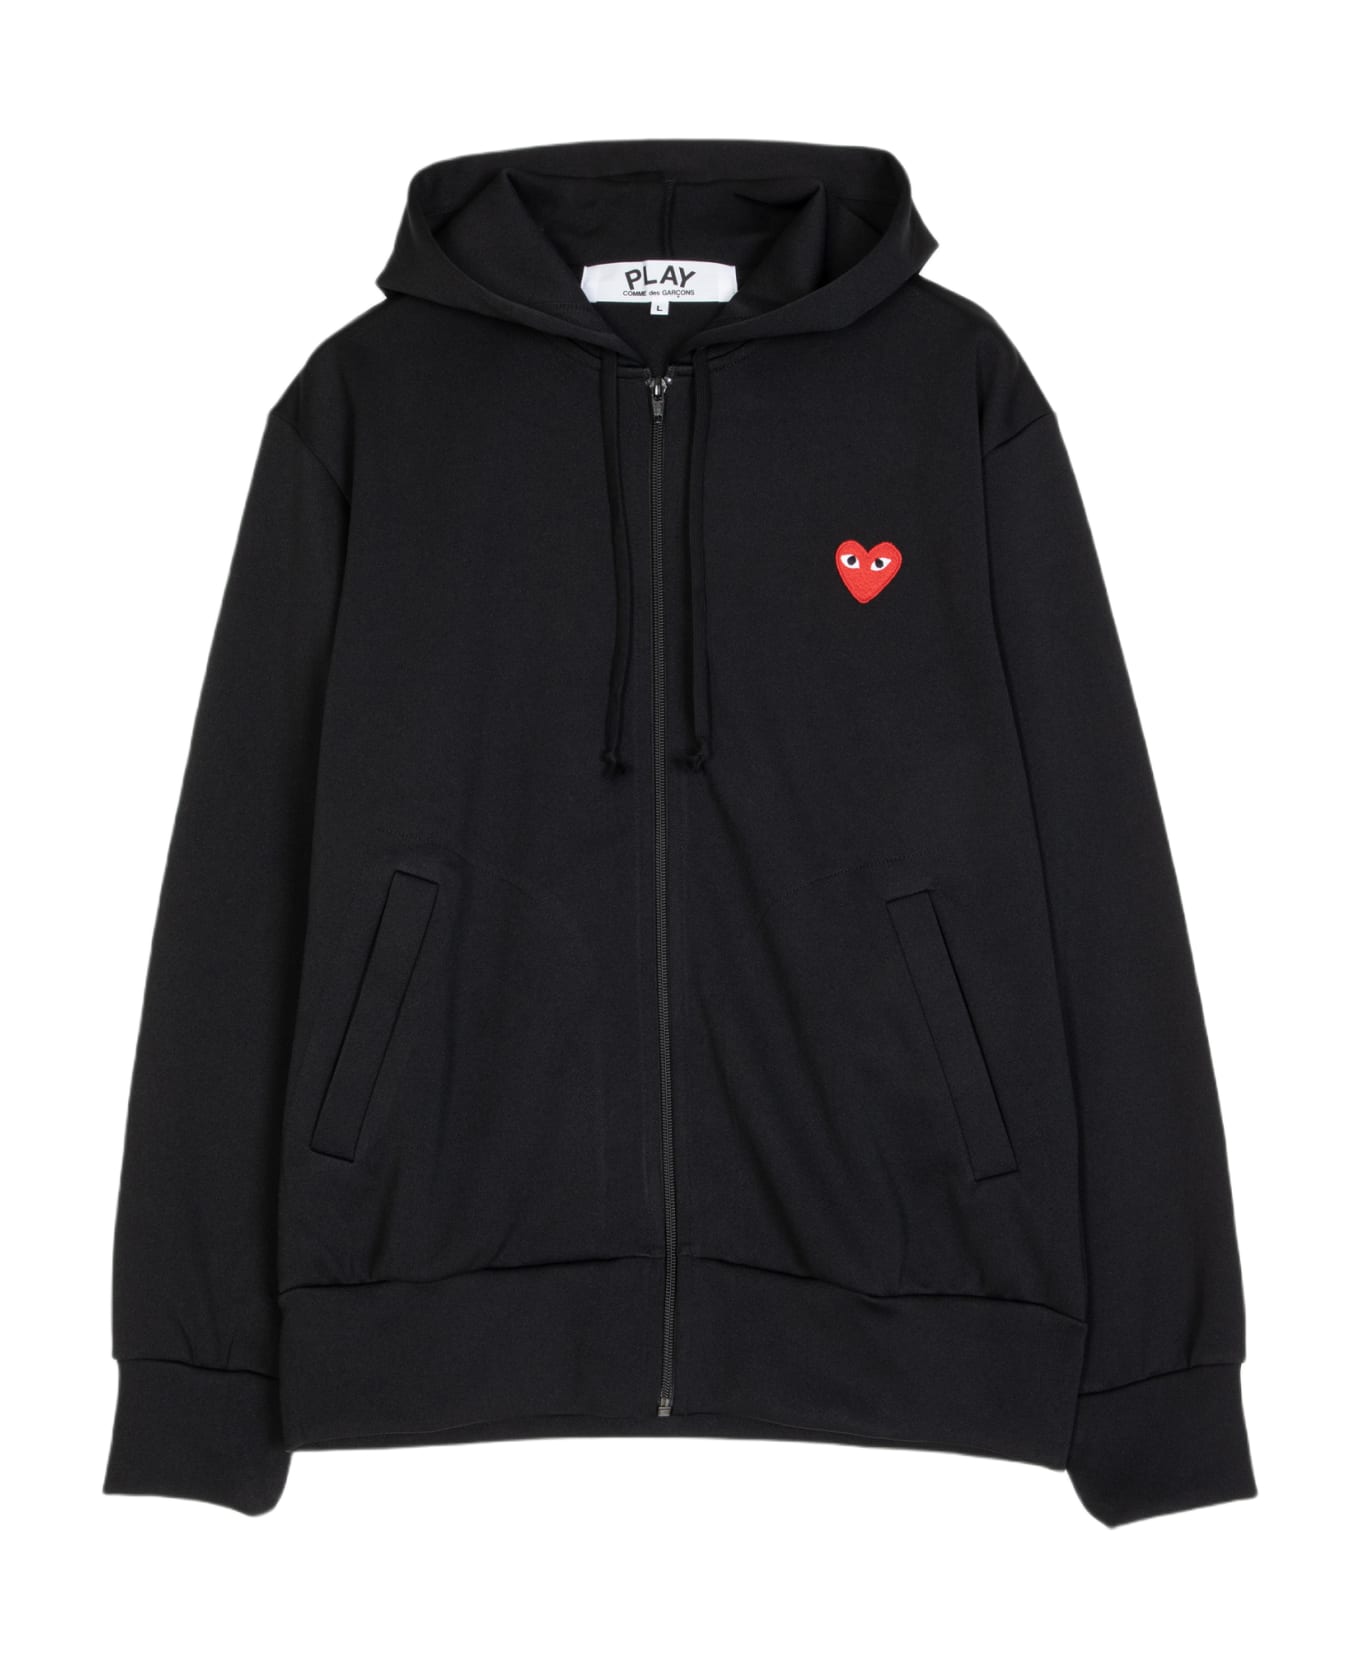 Comme des Garçons Play Mens Sweatshirt Knit Black hoodie with zip and heart patch at chest - Nero